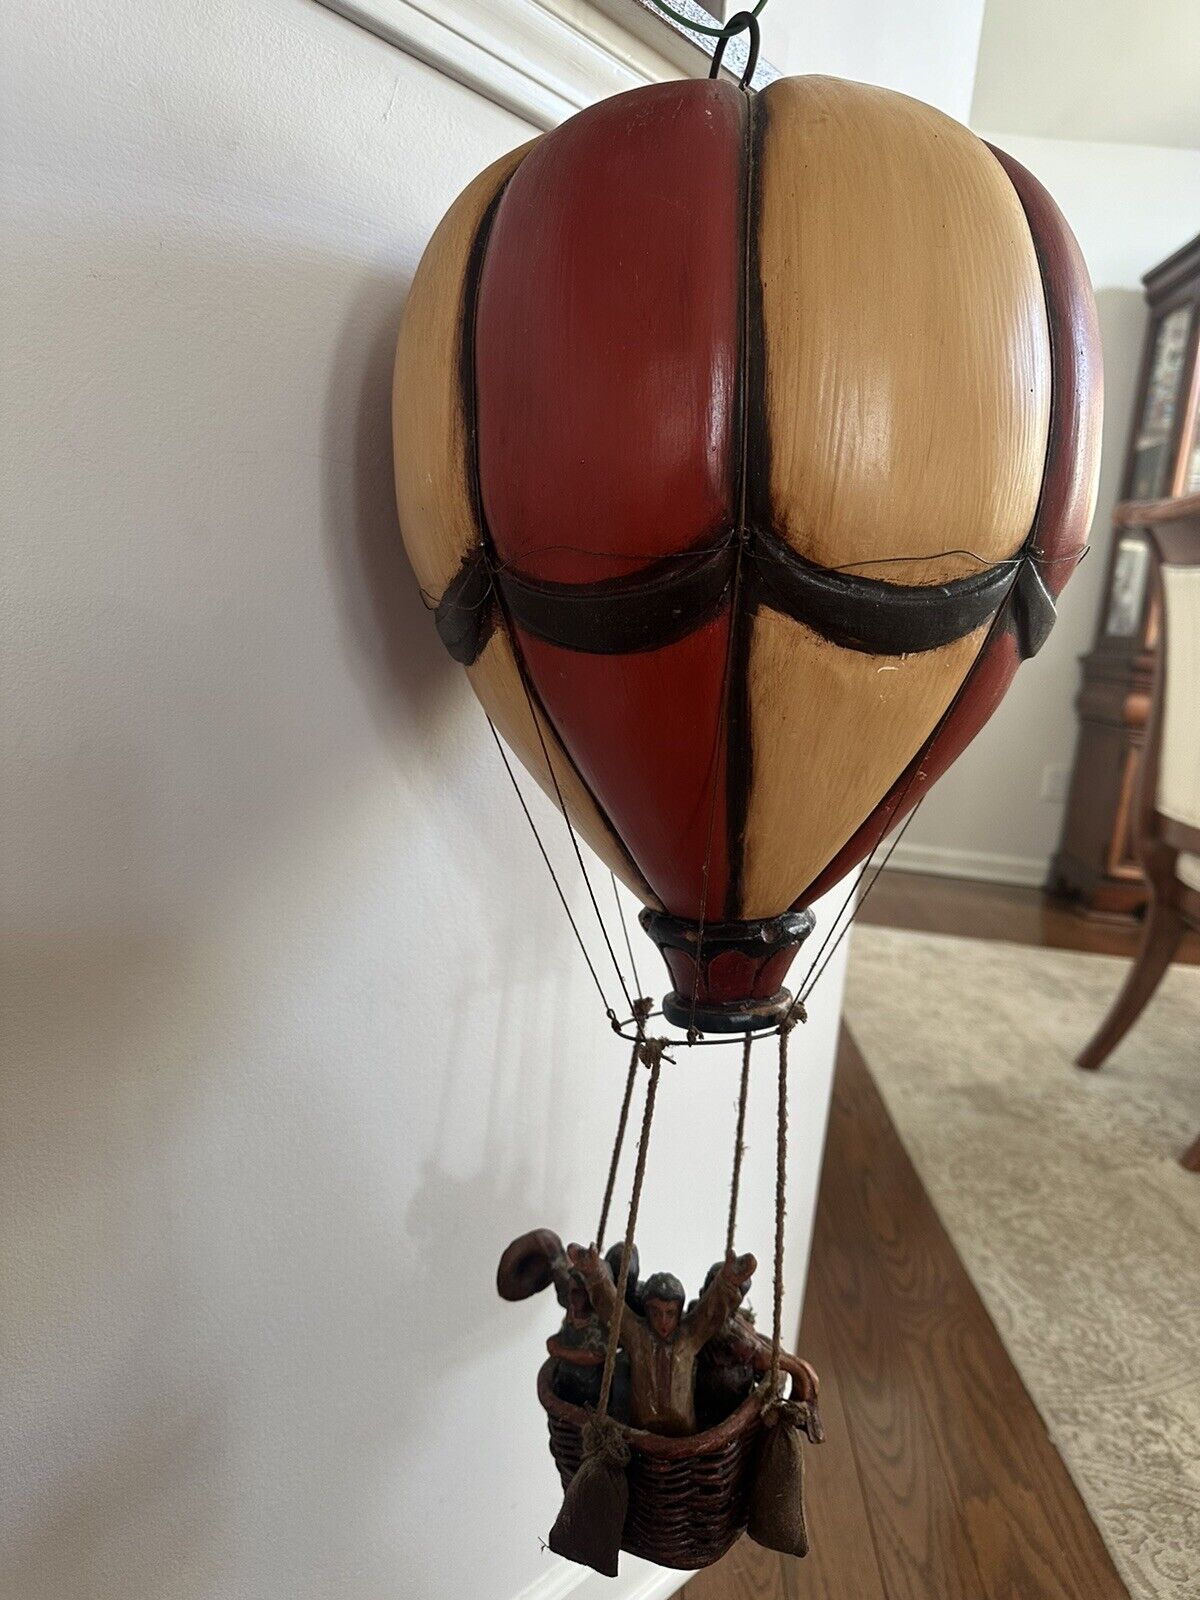 Large Antique Style Heinimex Hot Air Balloon Carrying 4 People - RARE - Great